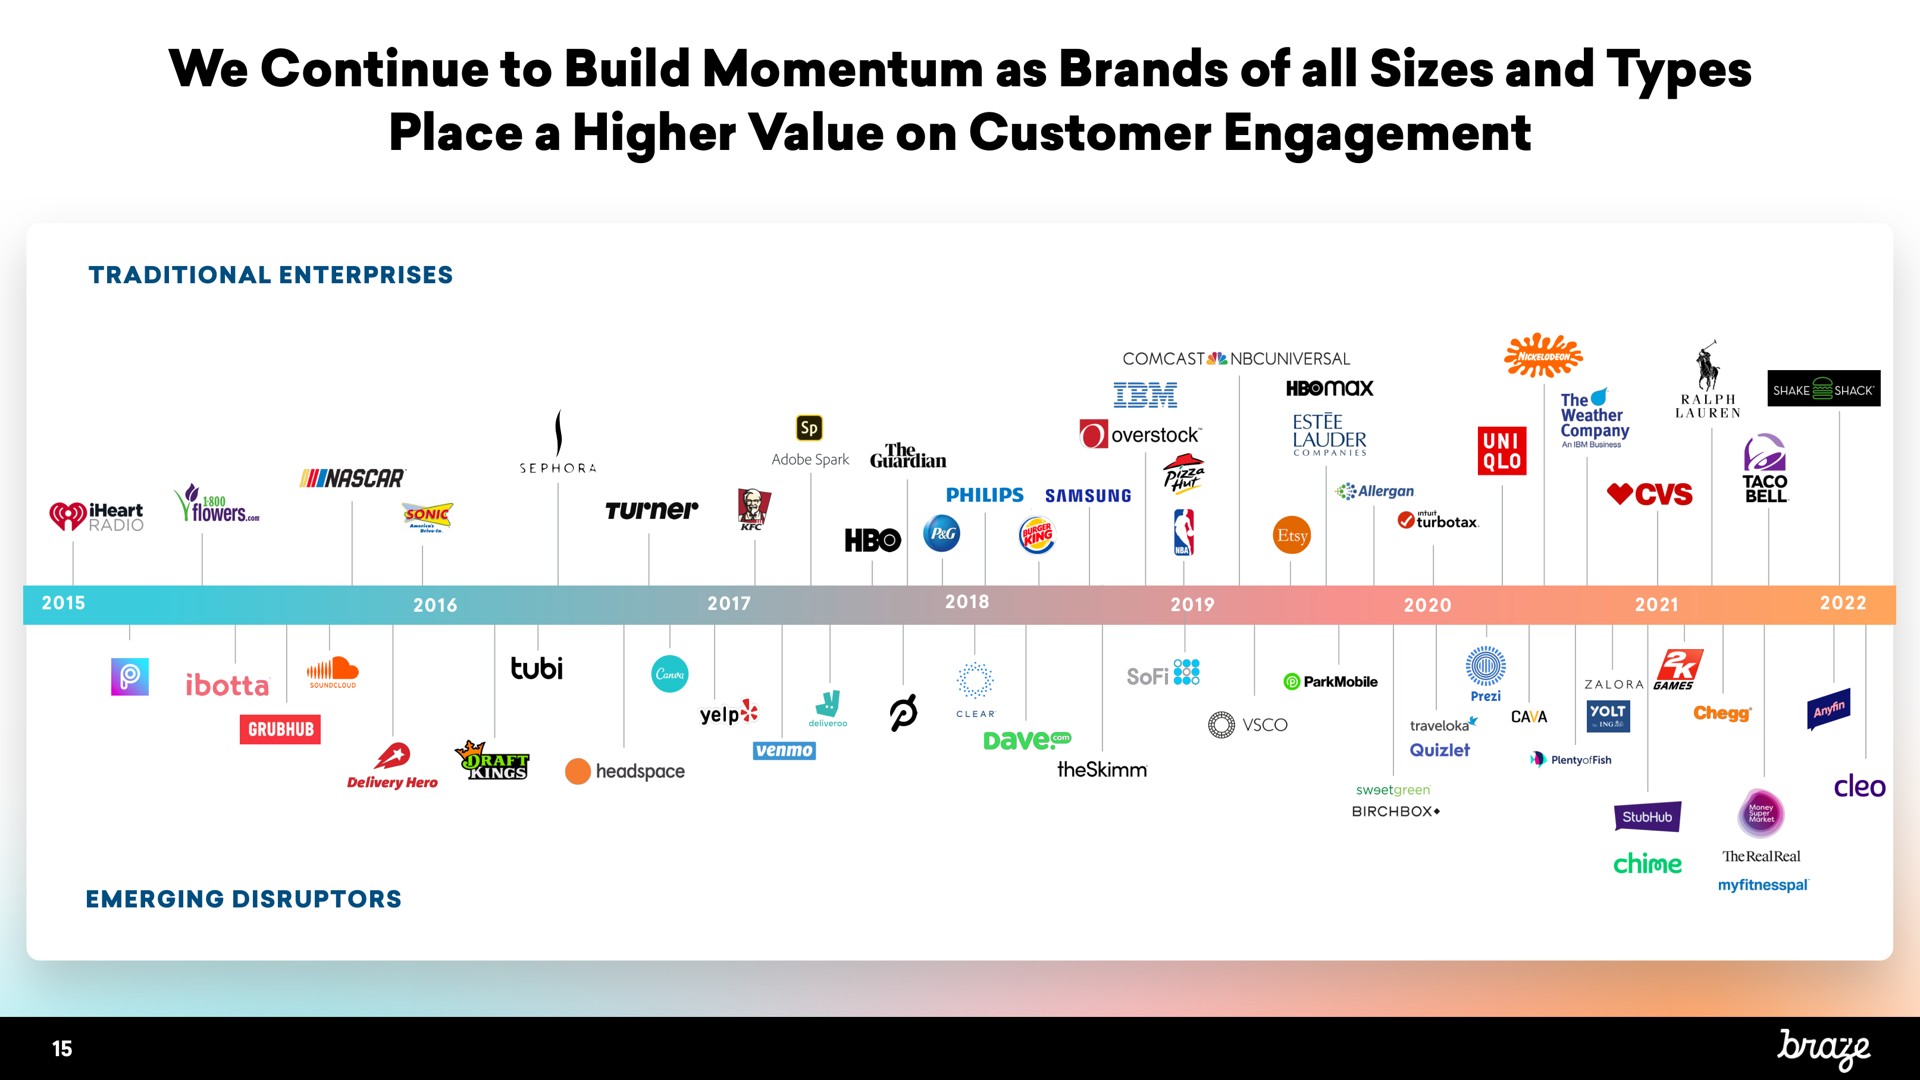 we continue to build momentum as brands of all sizes and types place a higher value on customer engagement he sellers | Braze